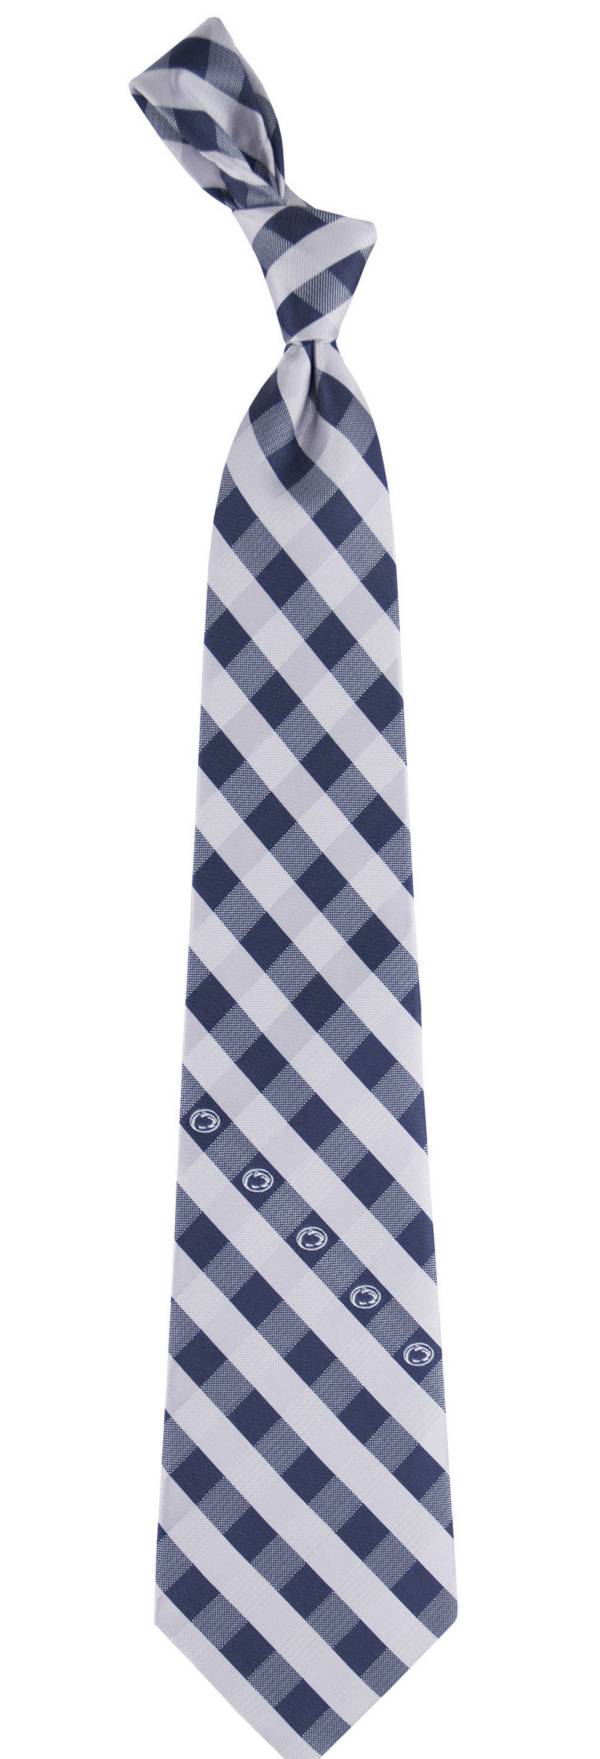 Eagles Wings Penn State Nittany Lions Check Necktie product image